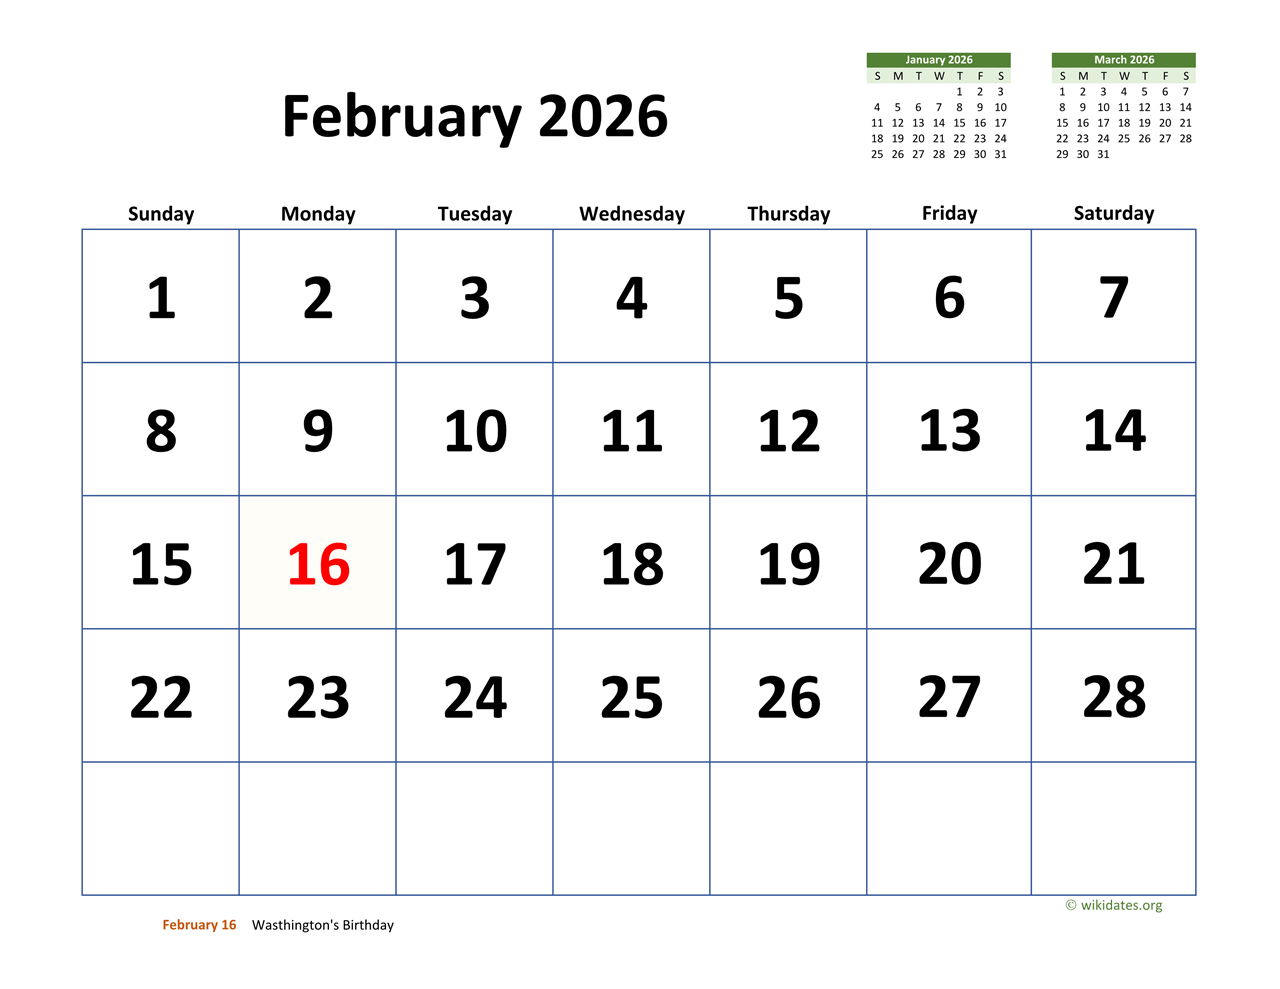 February 2026 Calendar with Extralarge Dates